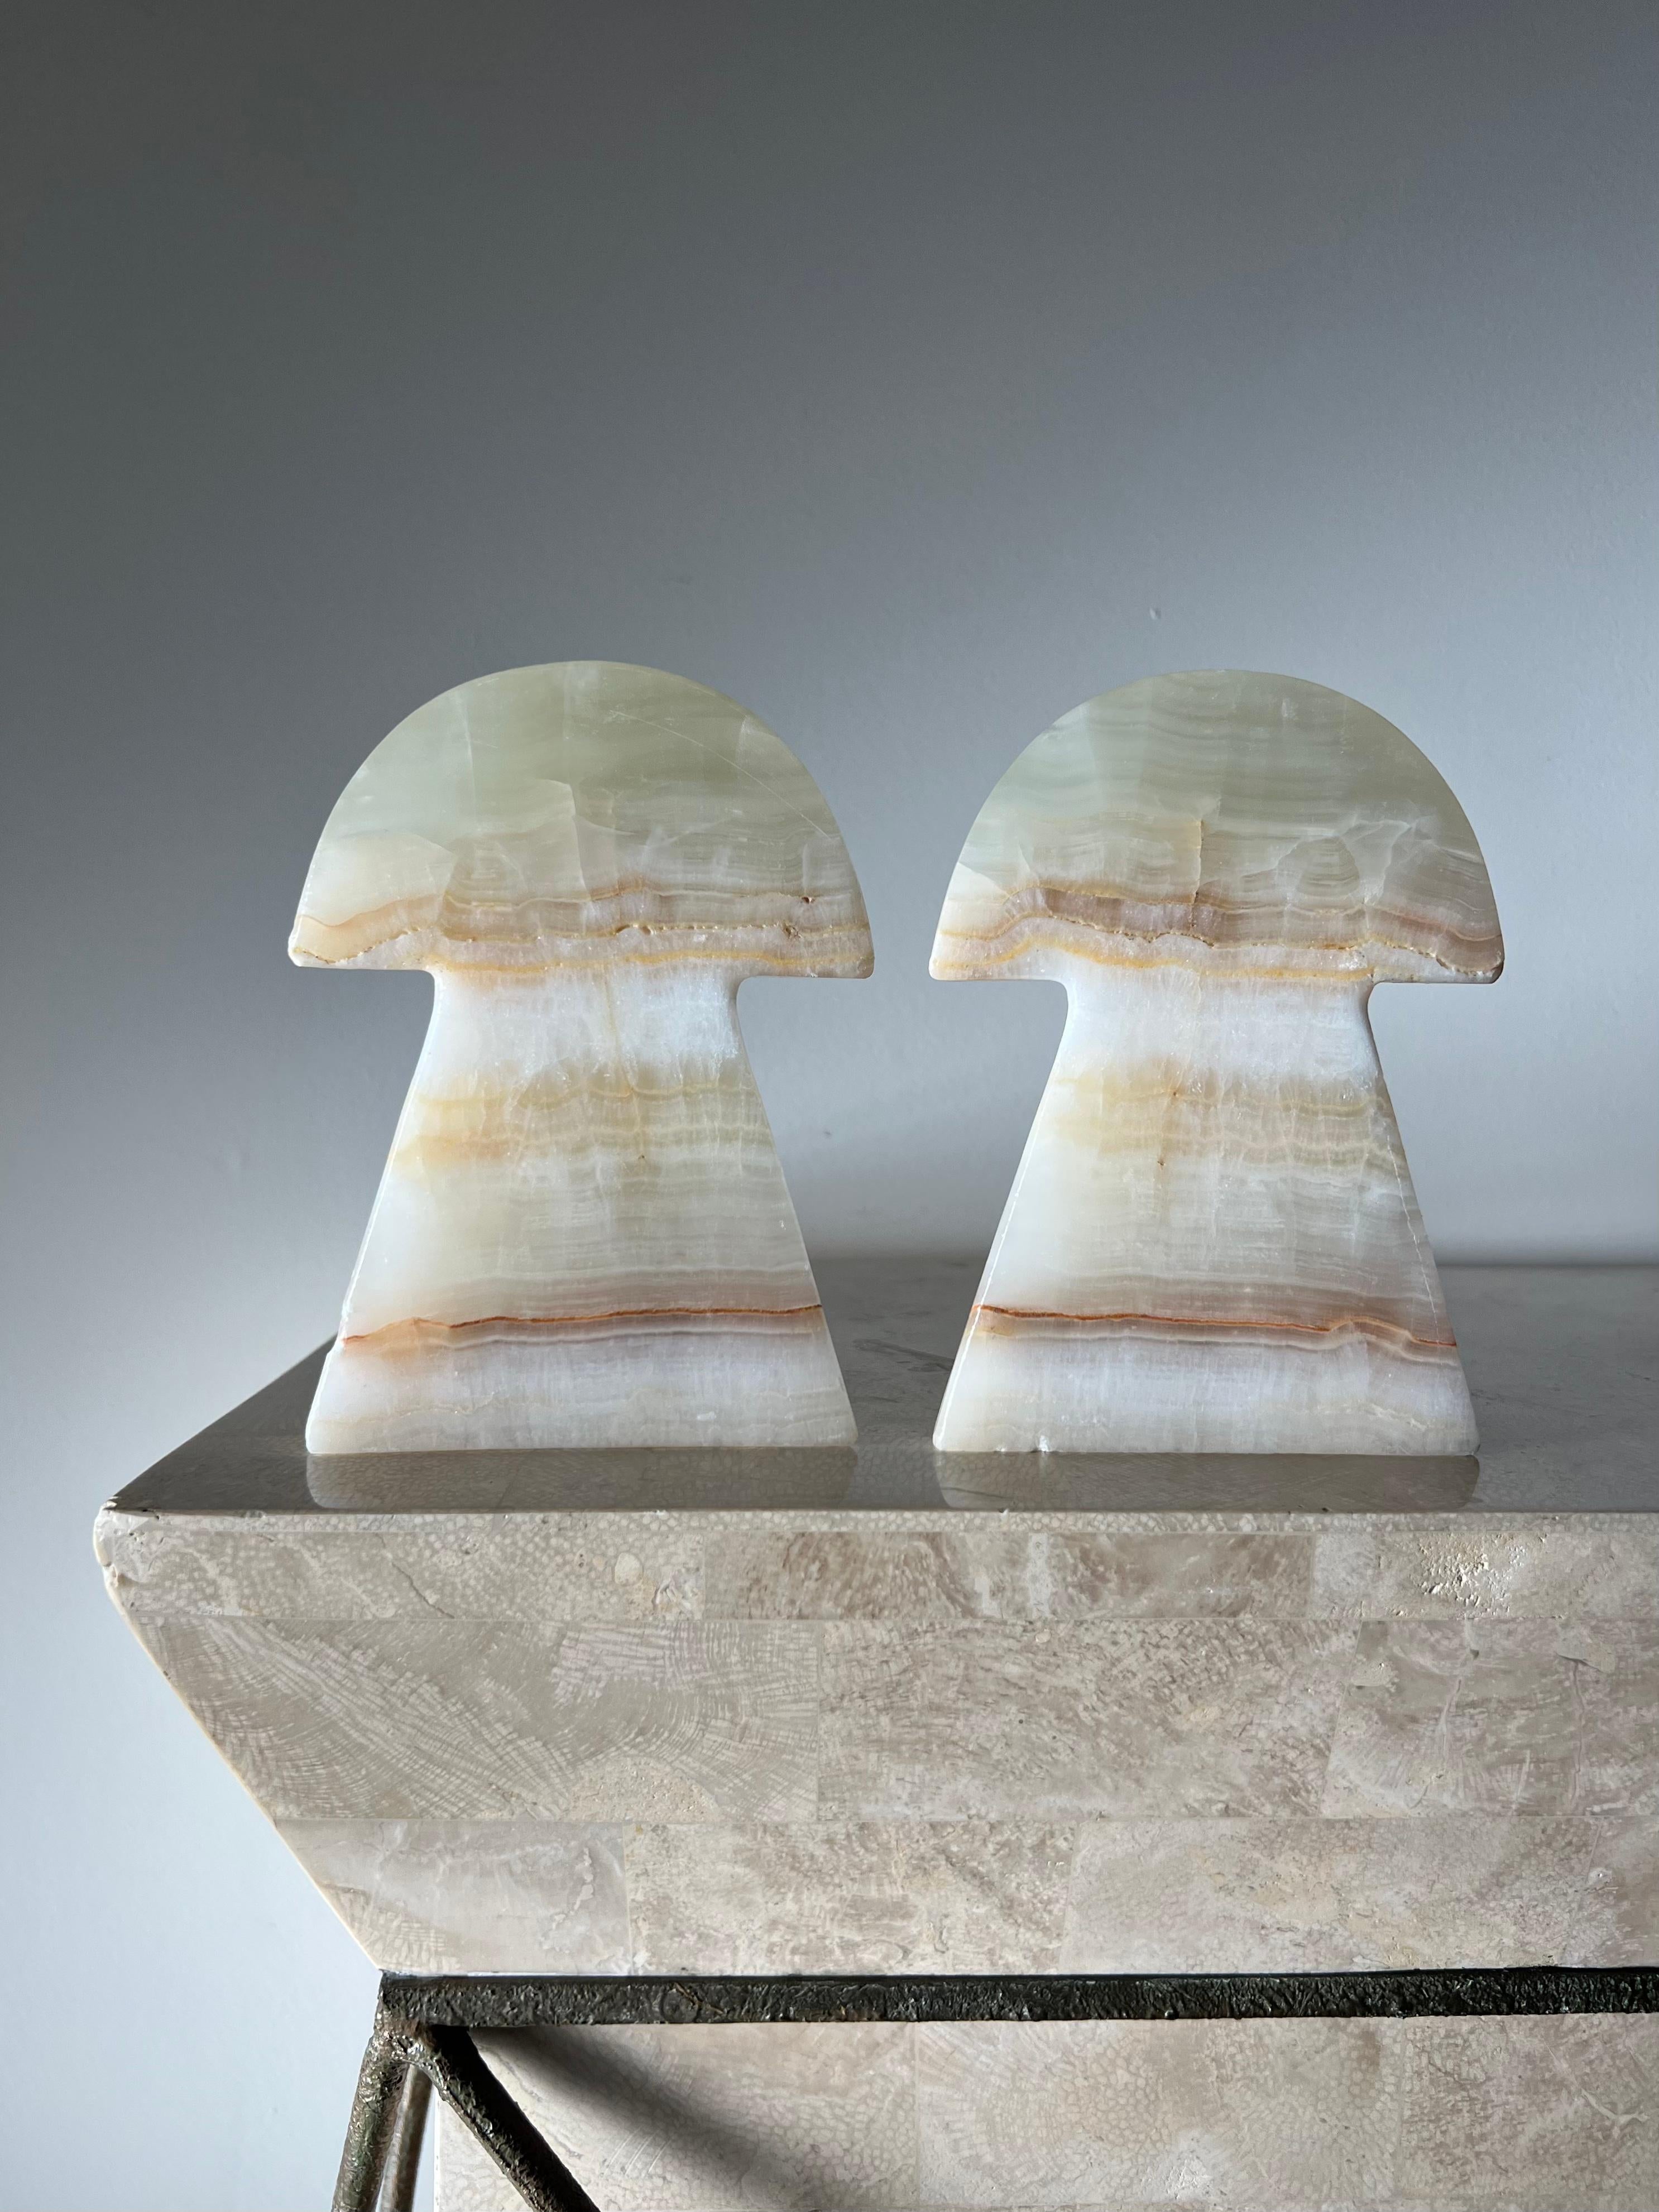 A pair of vintage Italian onyx mushroom bookends, 1960s. Tones of cellophane, caramel, and rust. Minor signs of wear consistent with age but no outward flaws. 
as a unit: 4.5” W x 4.5” D x 6.5” H.